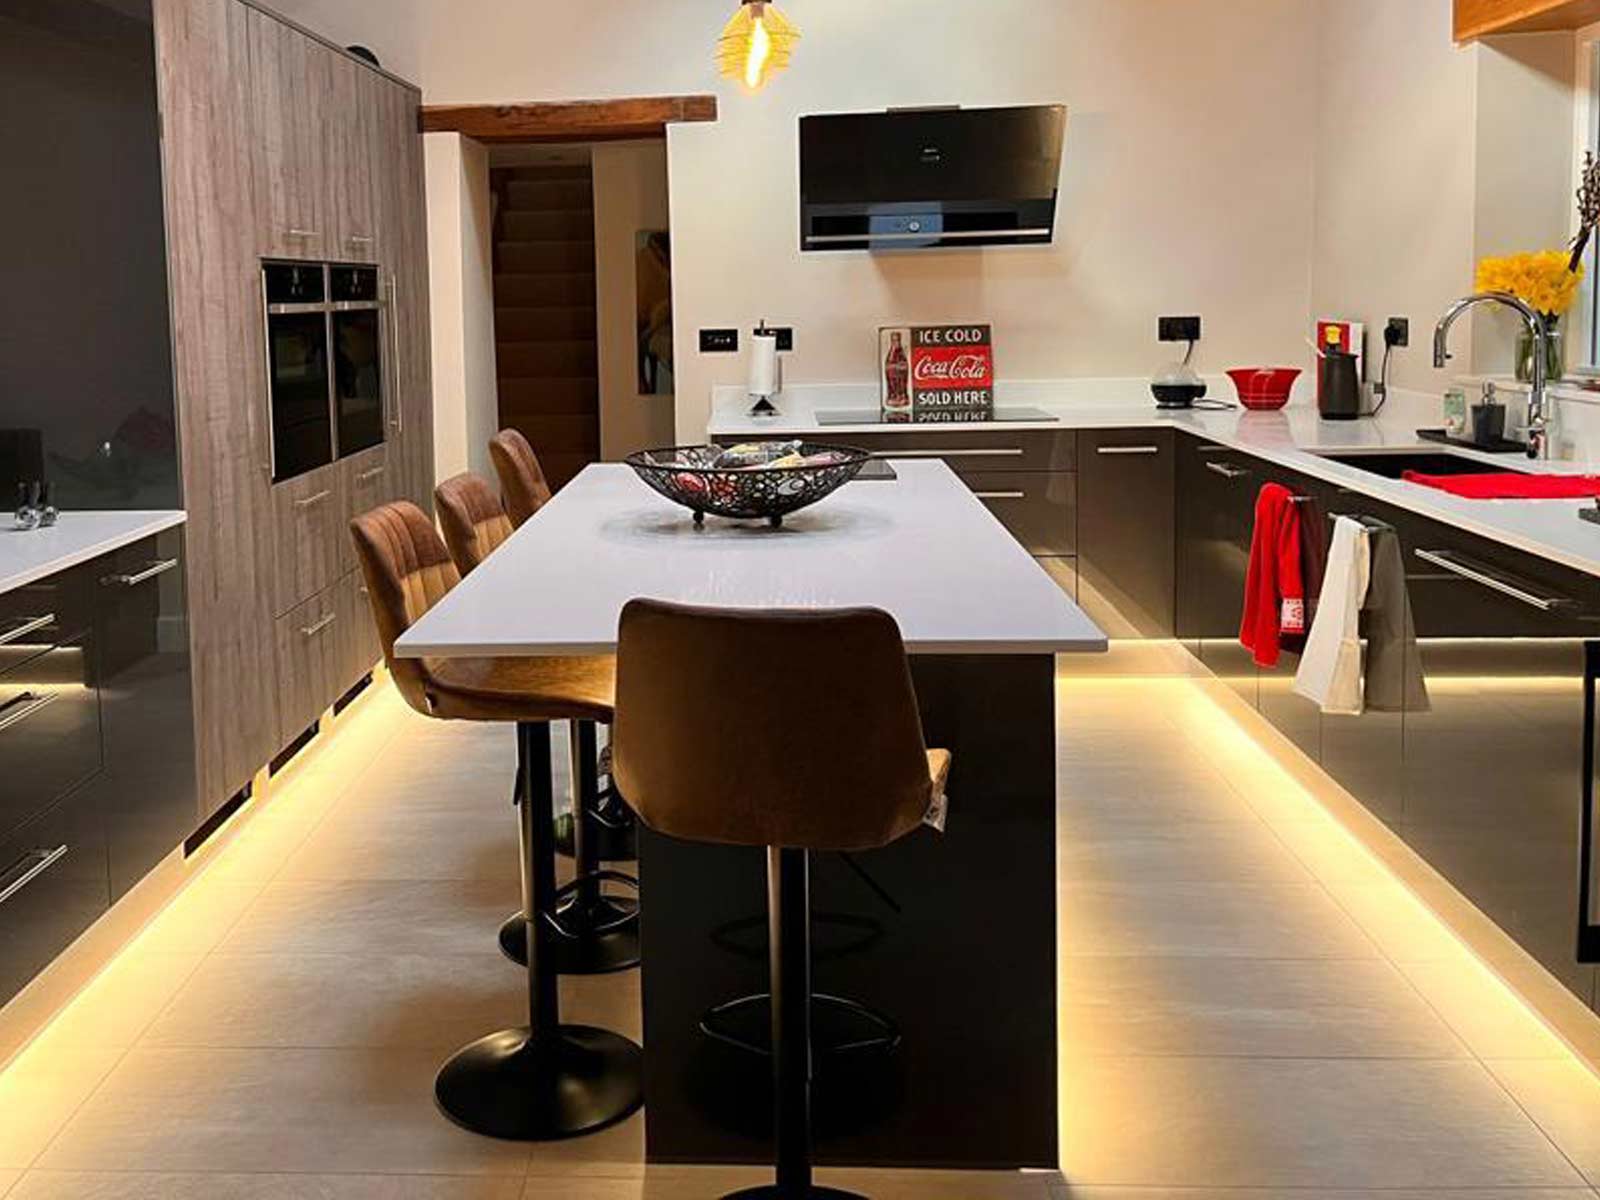 A modern gloss kitchen with under-cabinet lighting